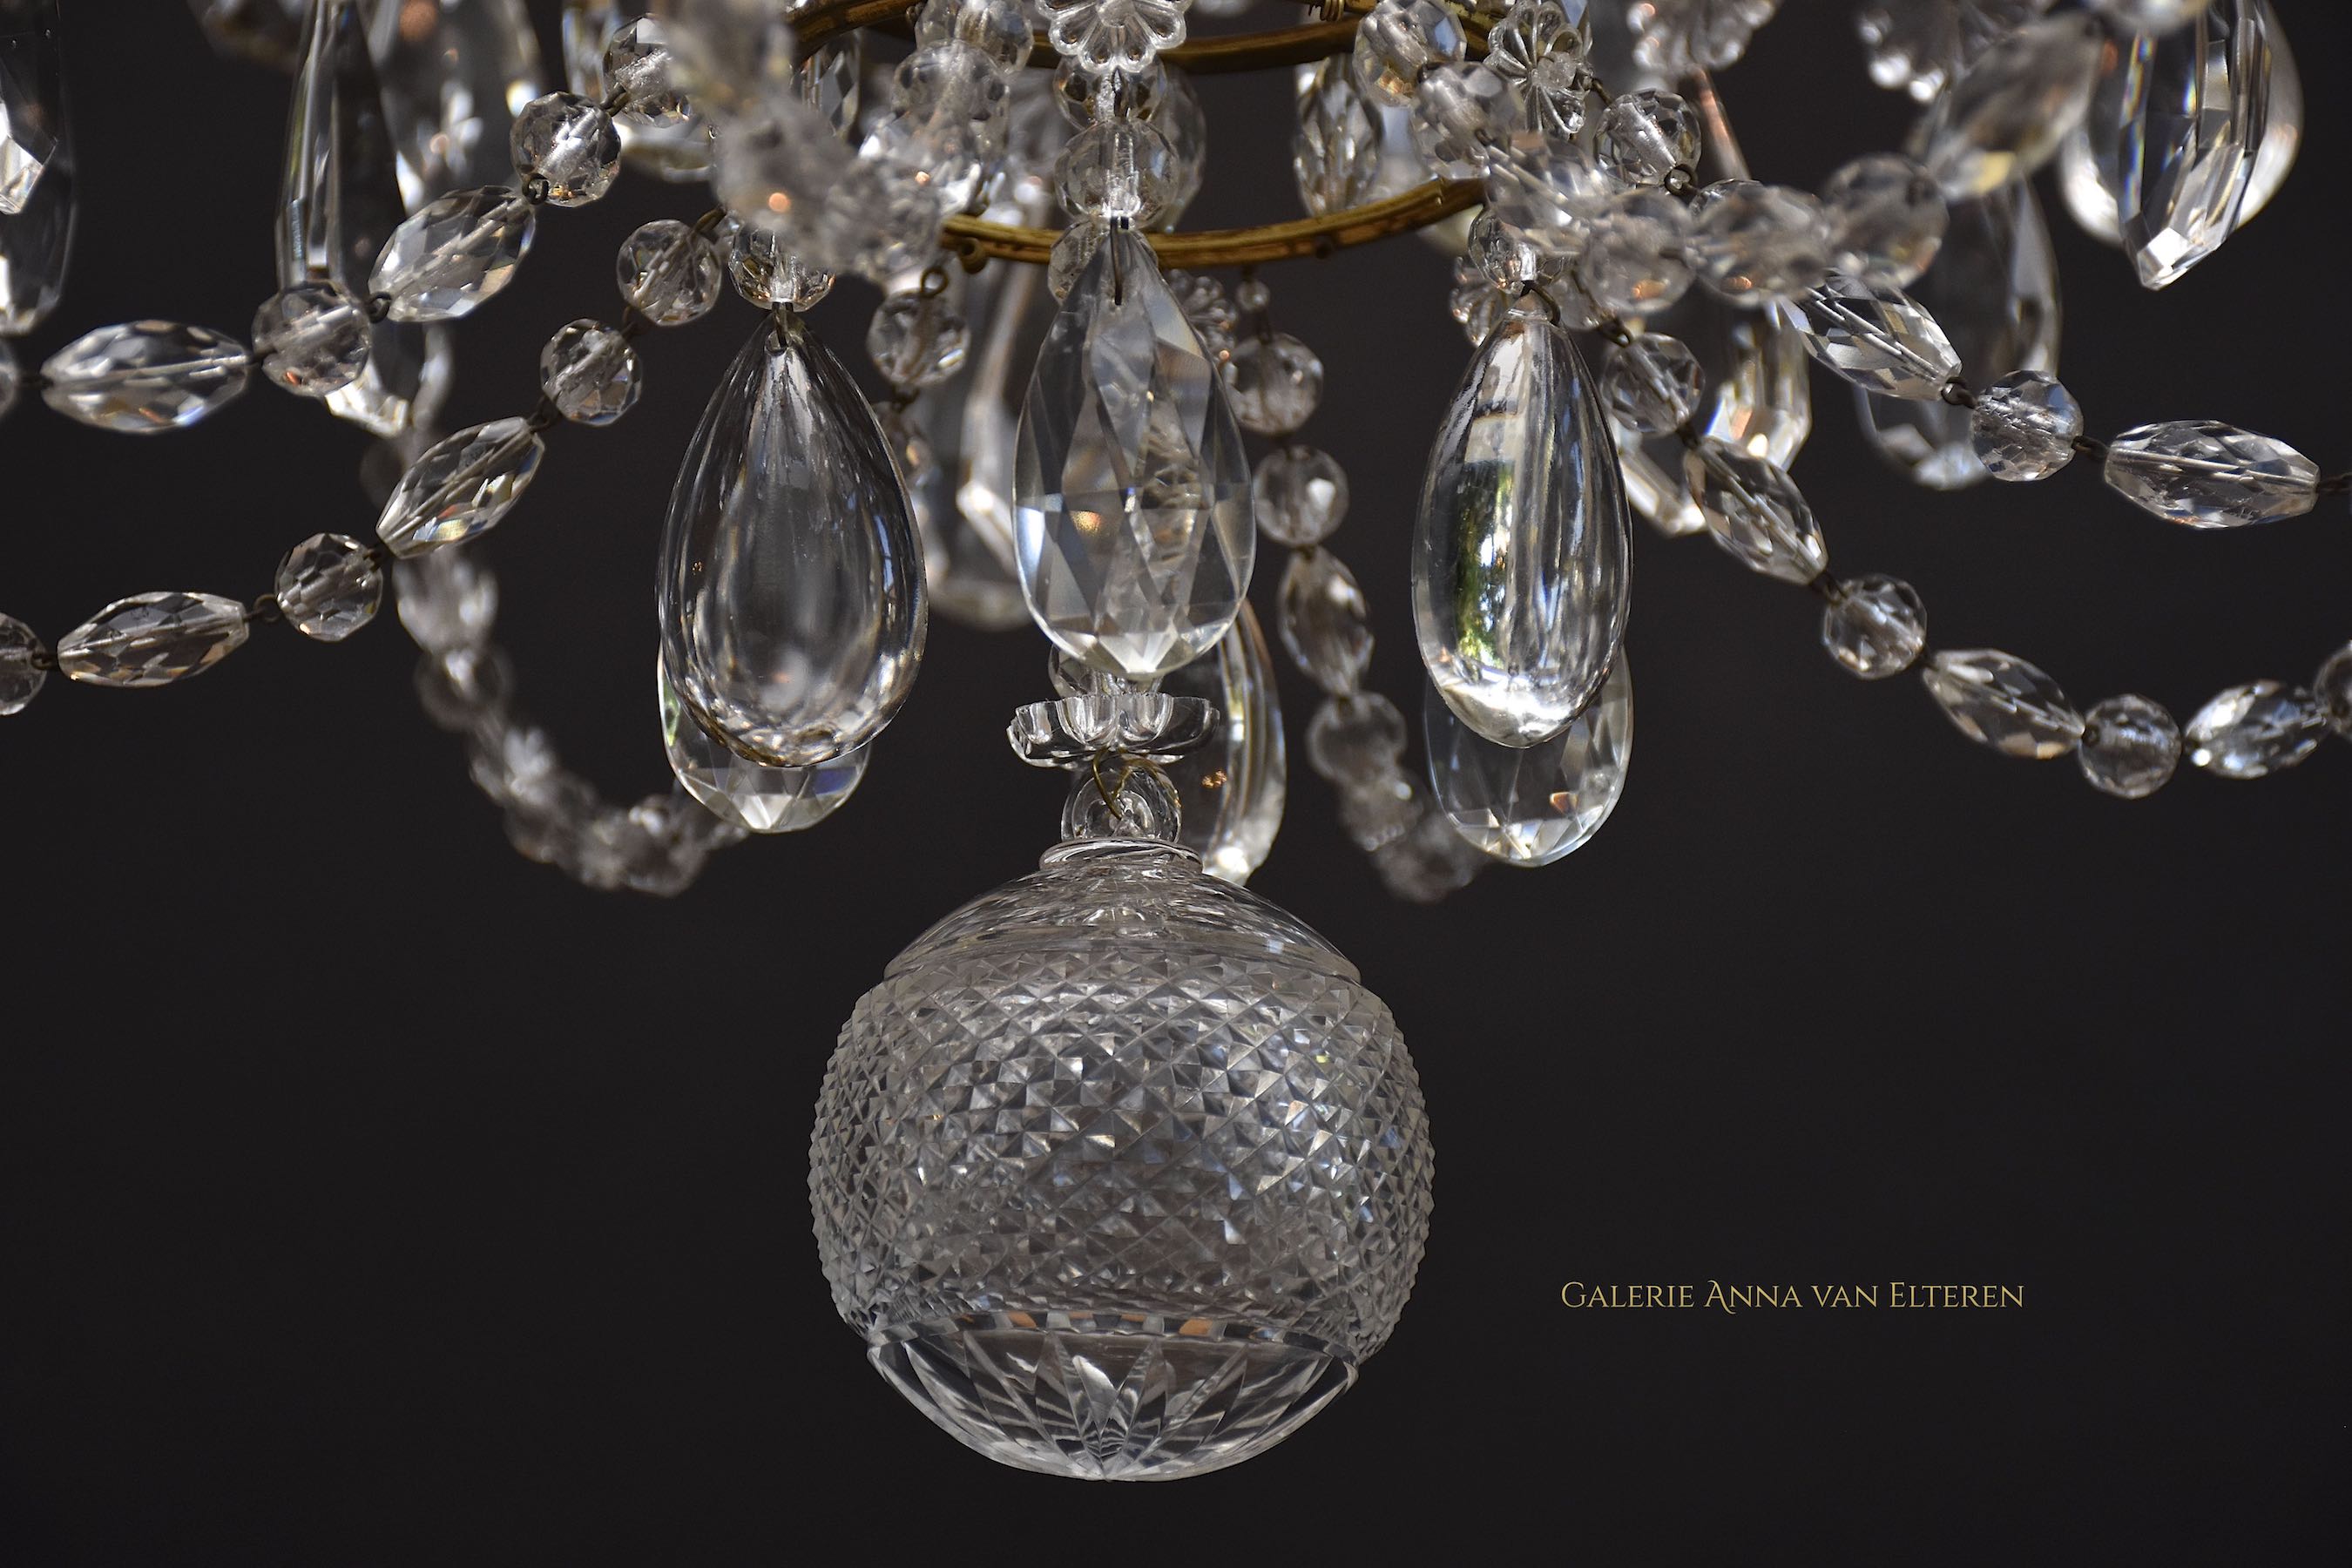 19th c. French chandelier in the style of Louis XVI